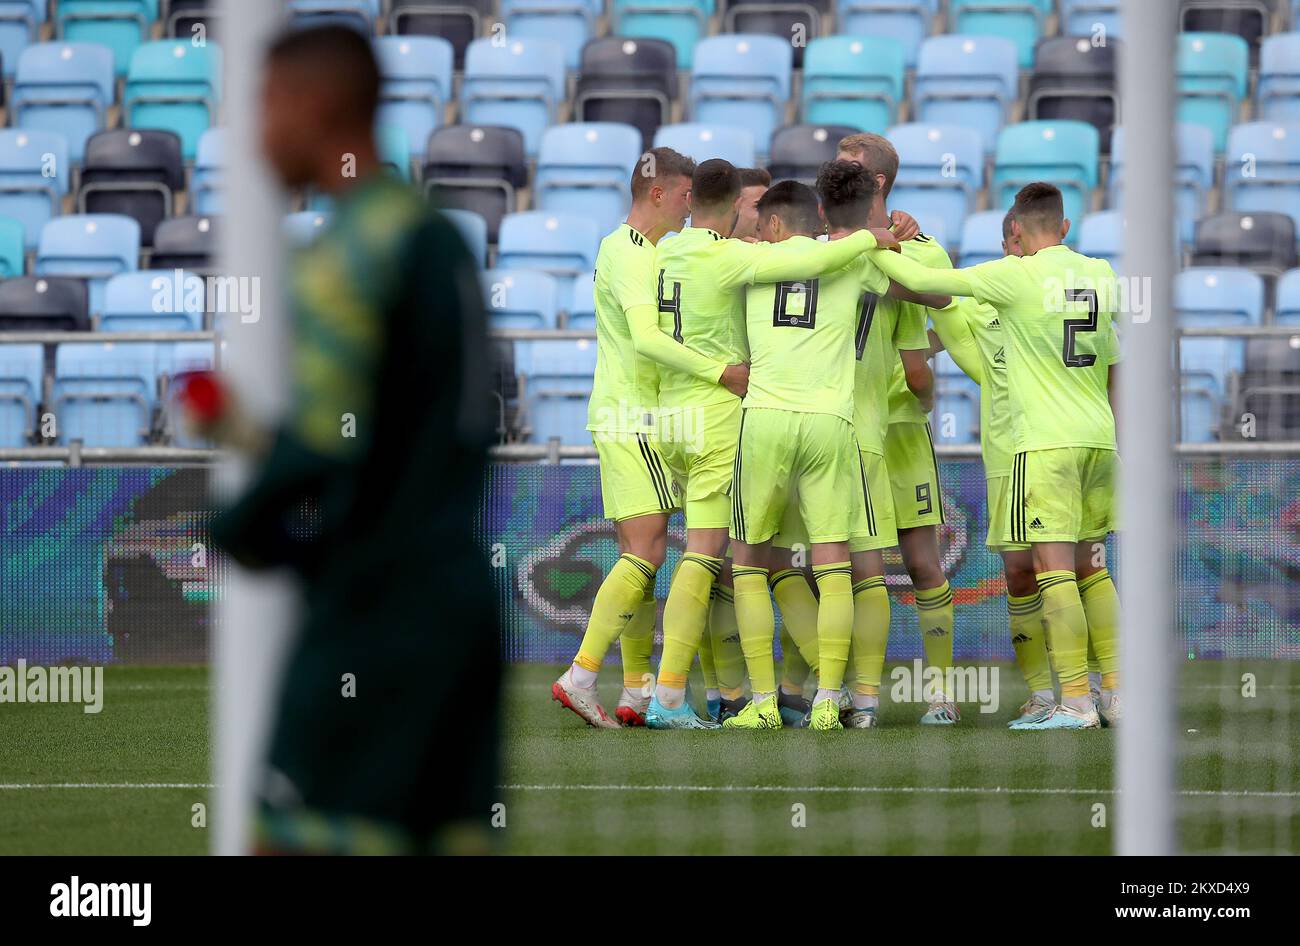 01.10.2019., City football Academy, Manchester, Angleterre- UEFA U19 Youth League, groupe C, tour 2, Manchester City - GNK Dinamo. Photo: Igor Kralj/PIXSELL Banque D'Images